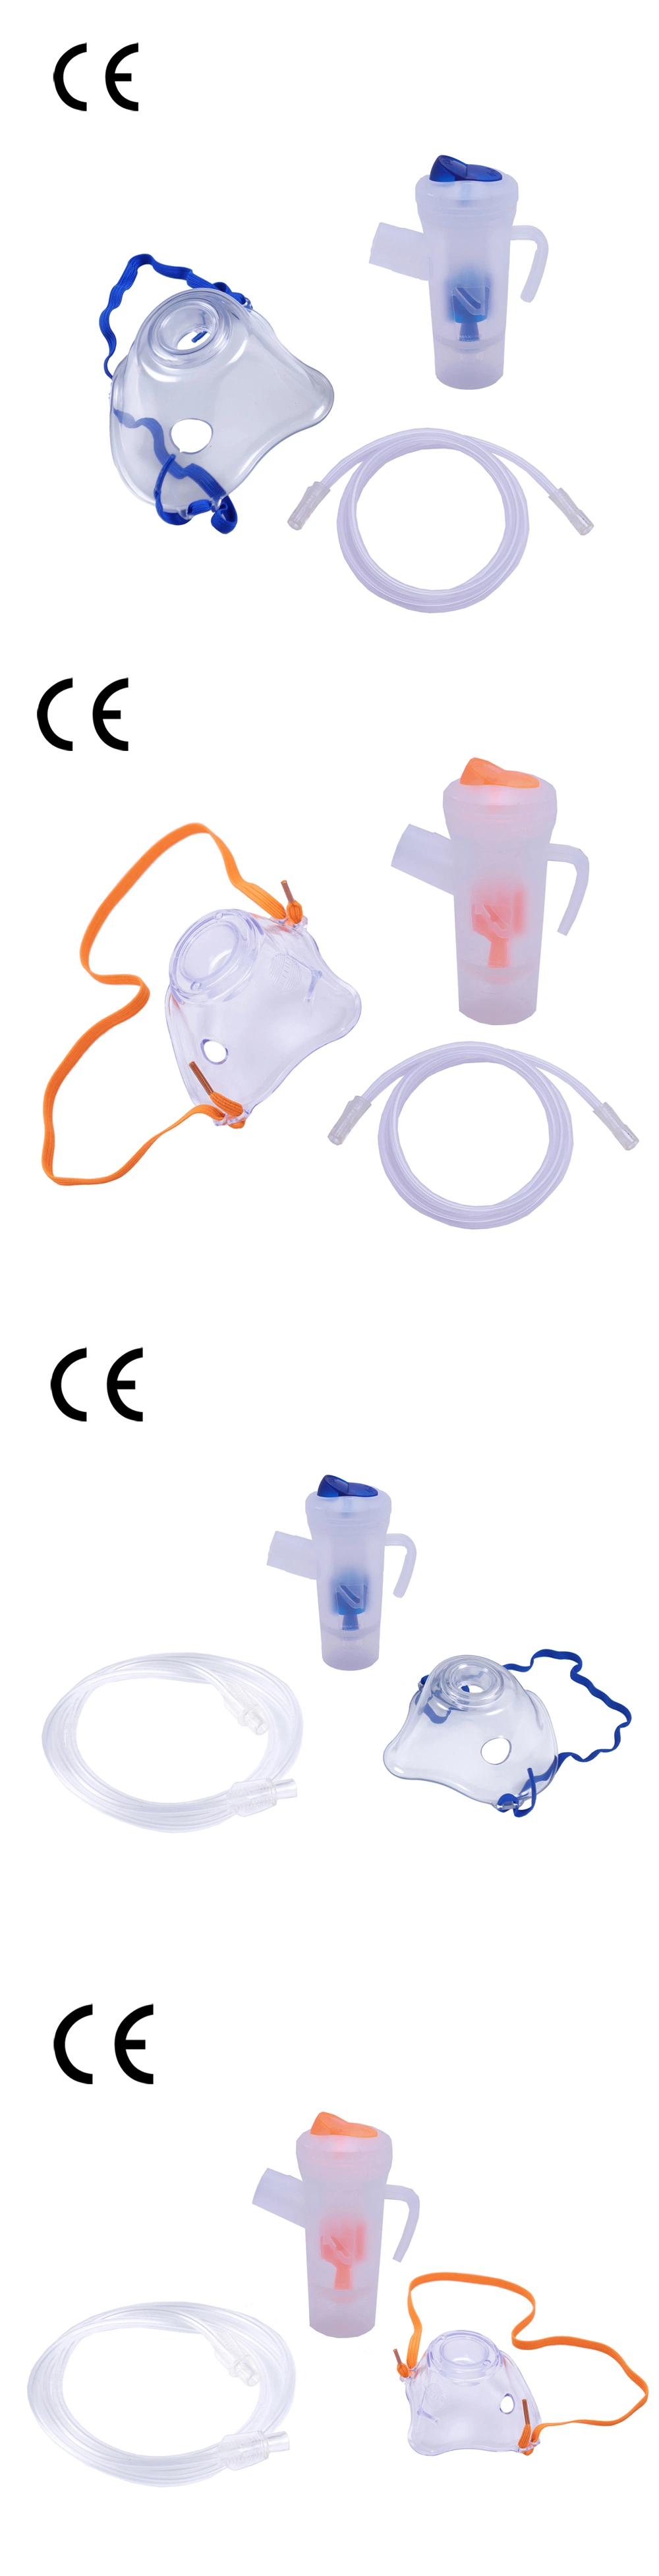 Oxygen Kit Button Slide Twin Adjustment New Nebulizer Atomization Cup Universal Inhaler Cup Medicine for Adult/Children Family Health Care with CE/ISO